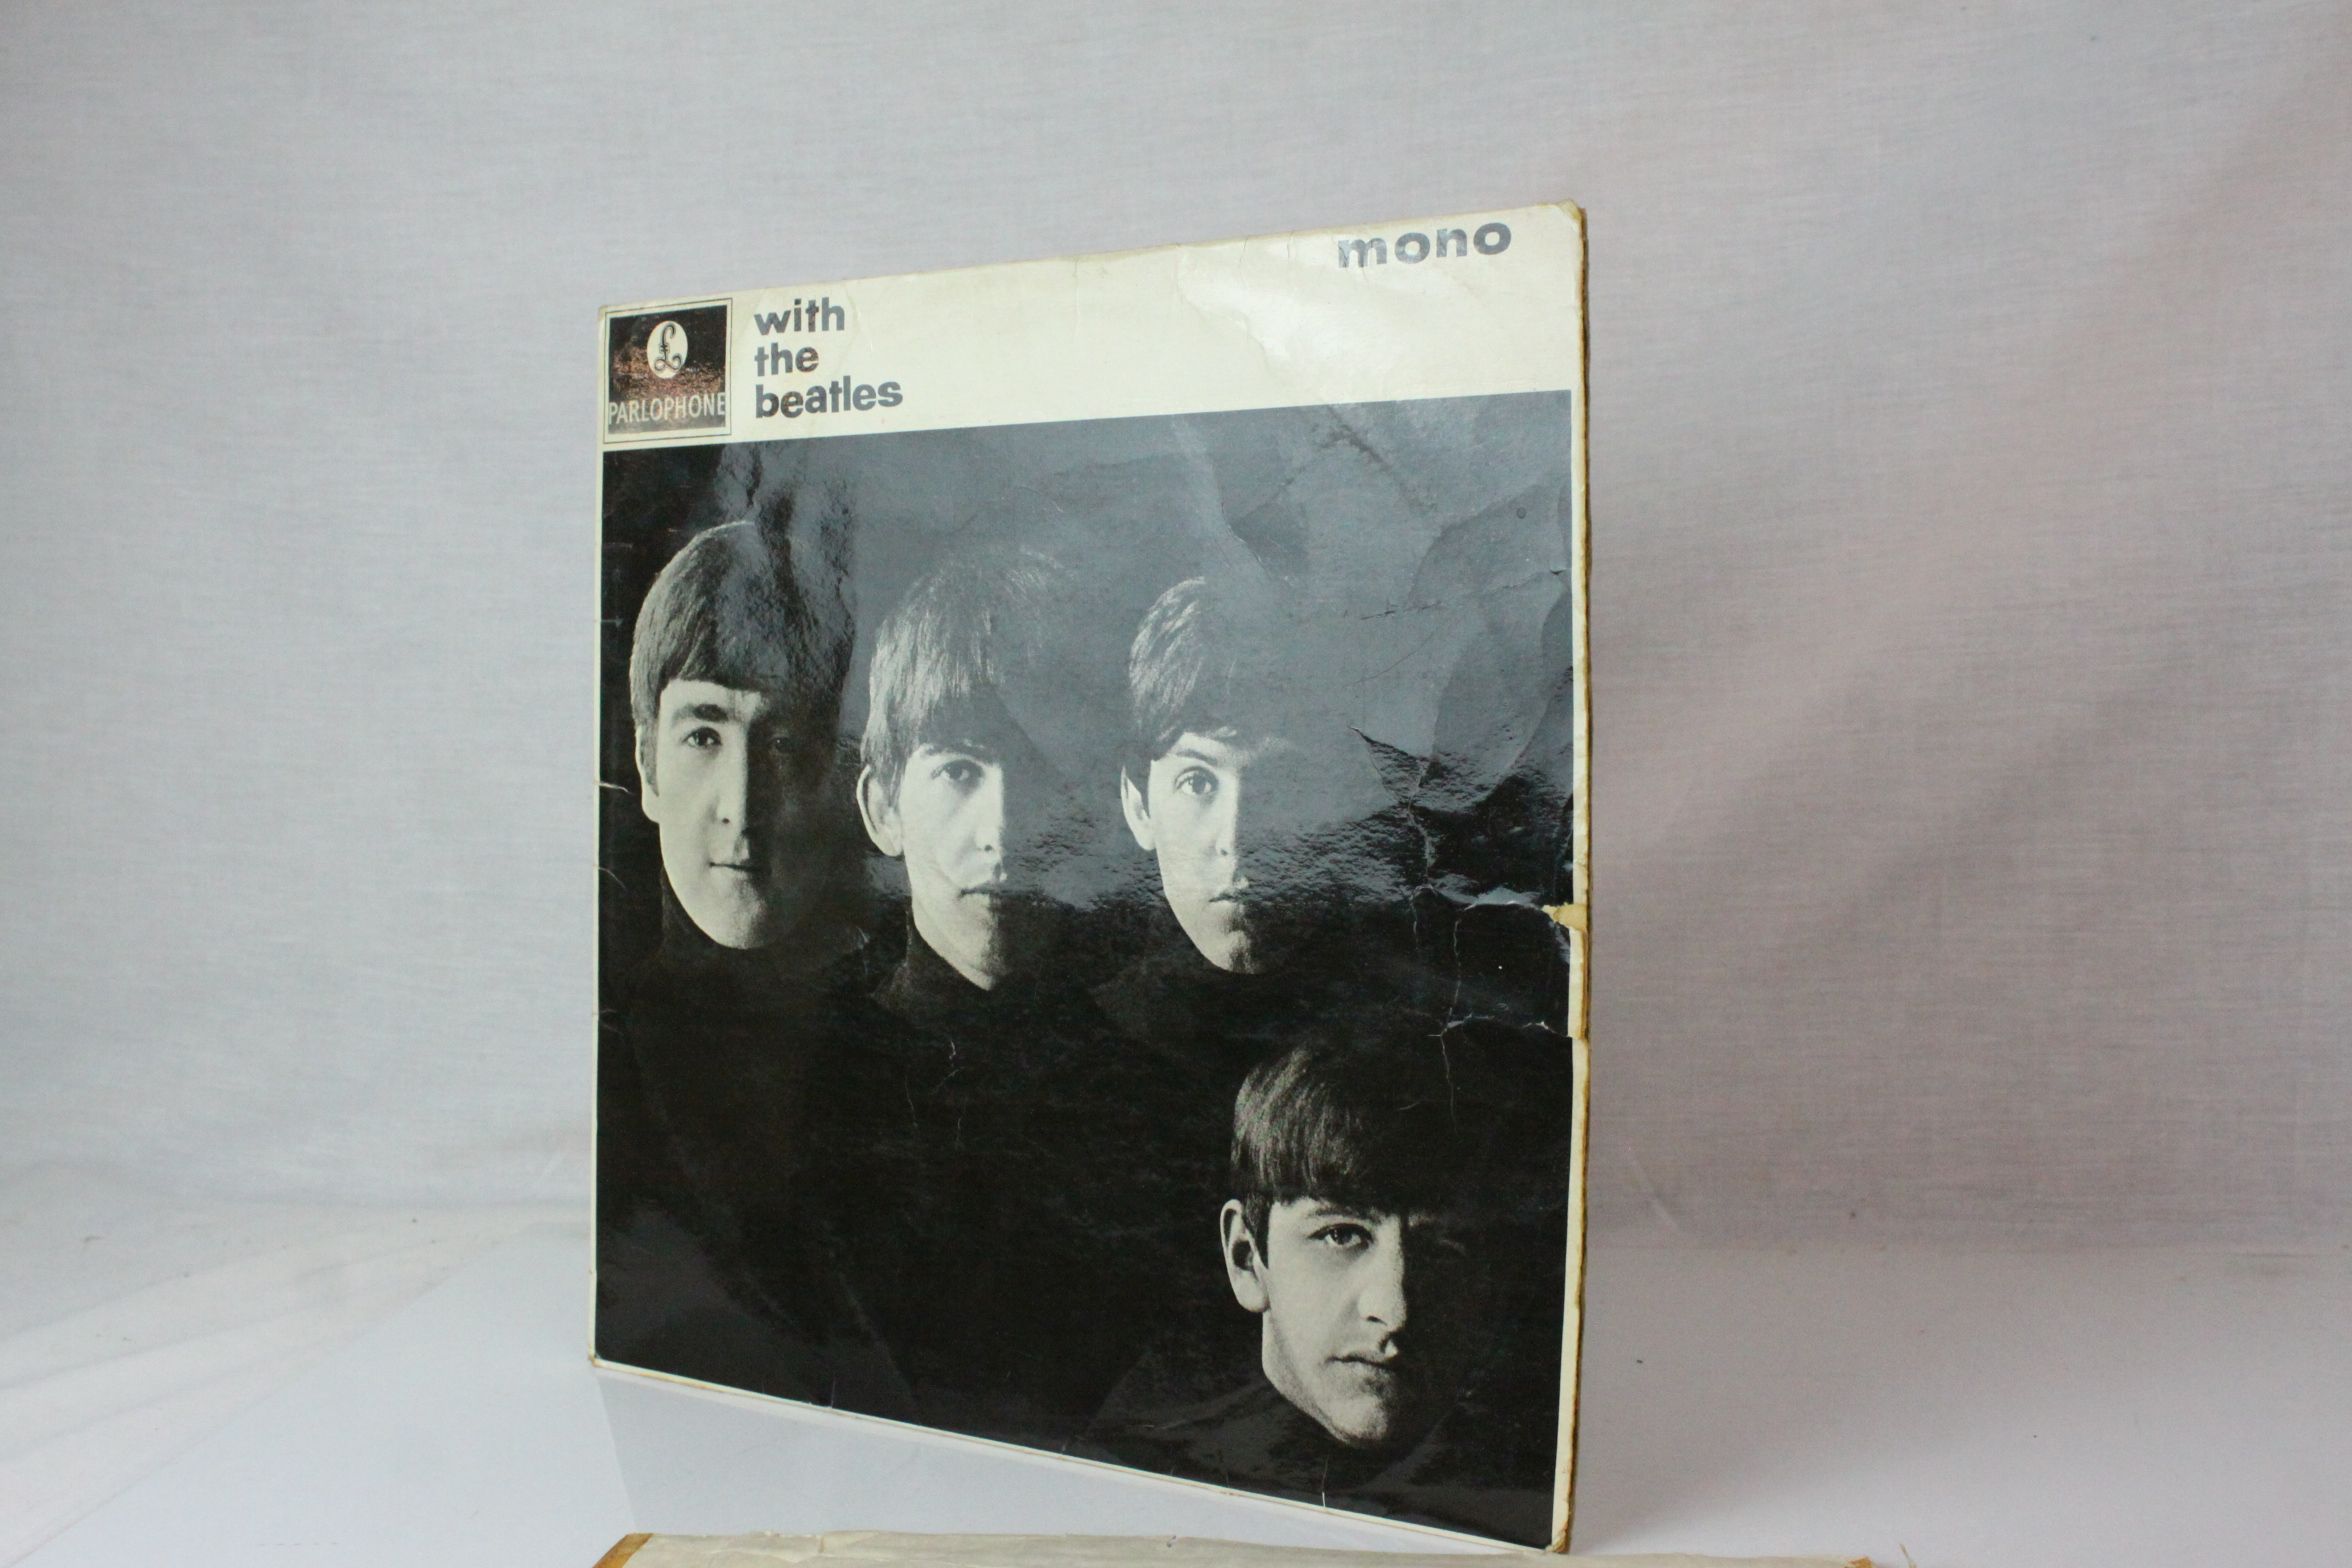 Vinyl - Four The Beatles LPs to include For Sale PMC1240 mono, Revolver PMC7009 mono, With The - Image 12 of 21